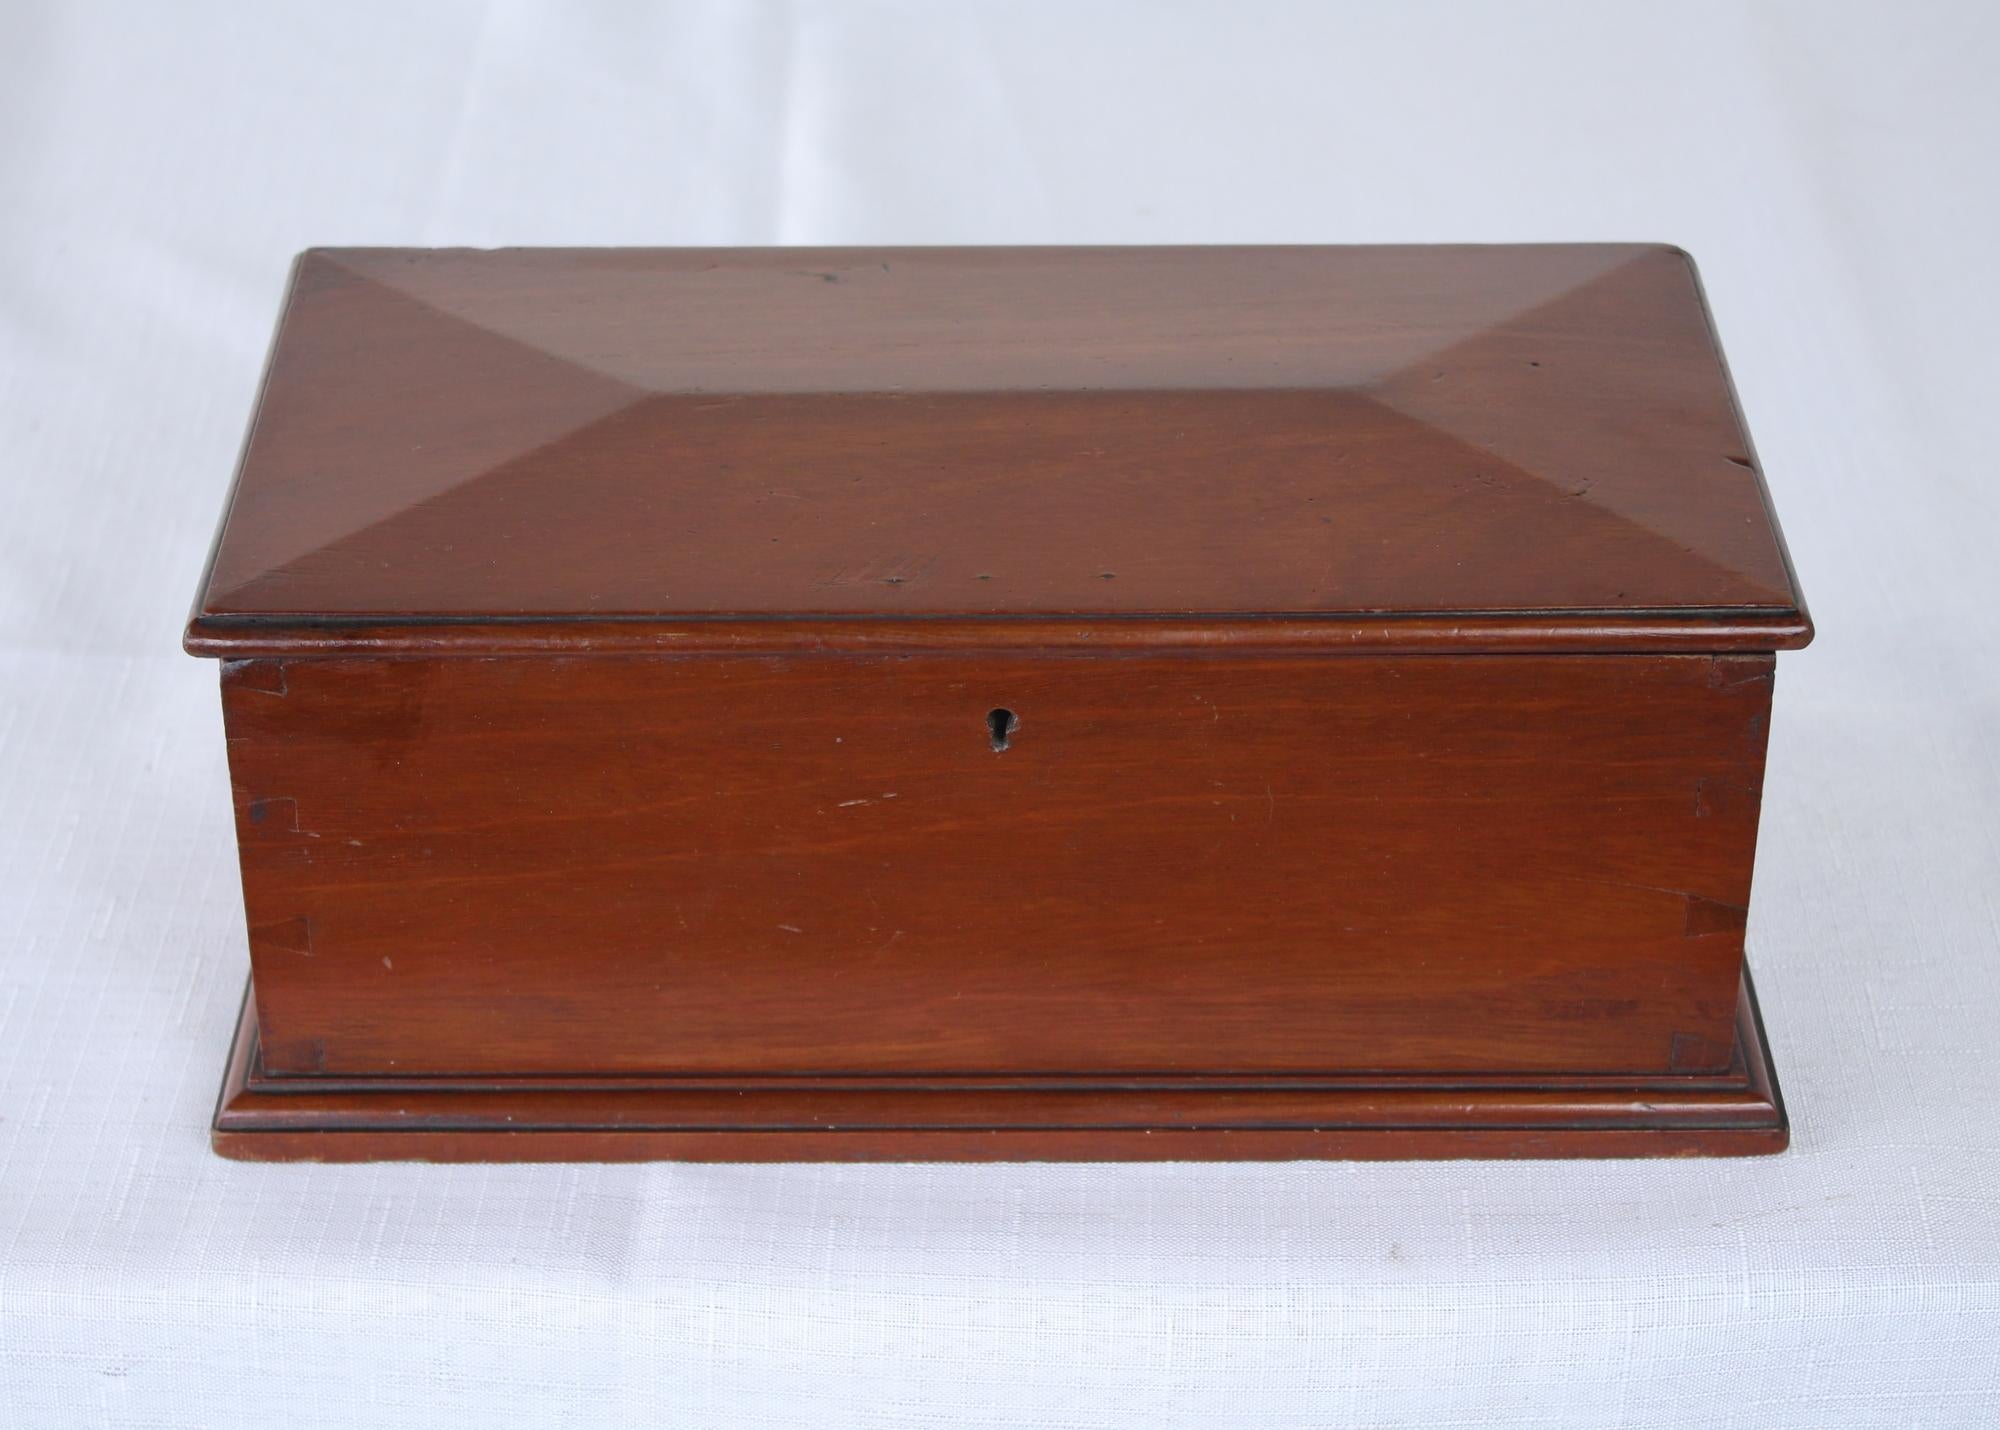 A simple mahogany box with a lovely shaped top. Very simple with good mouldings at the base and visible dovetailing. Highly decorative.